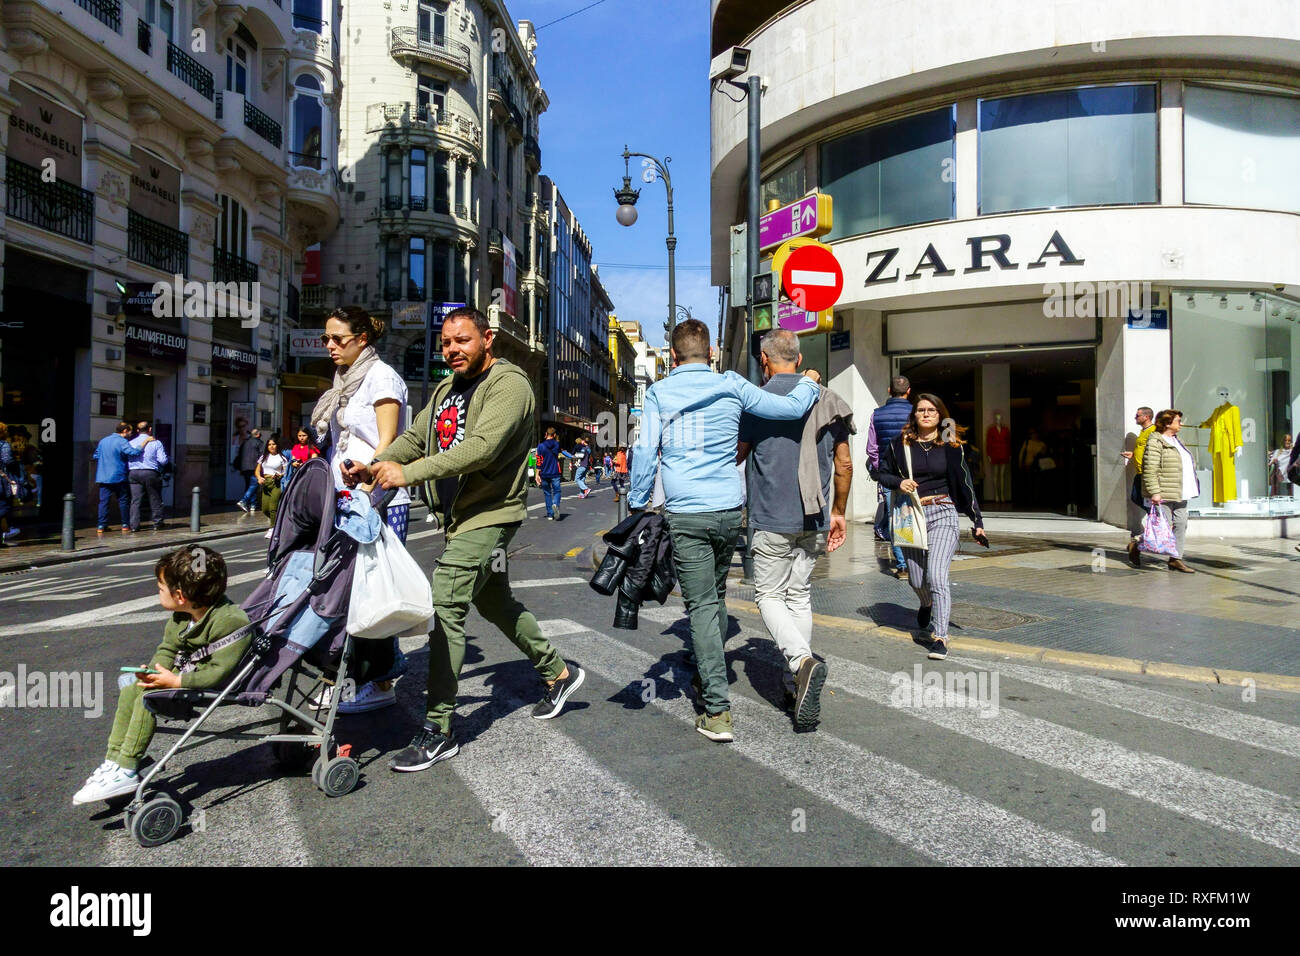 Zara Store Shop Spain High Resolution Stock Photography and Images - Alamy